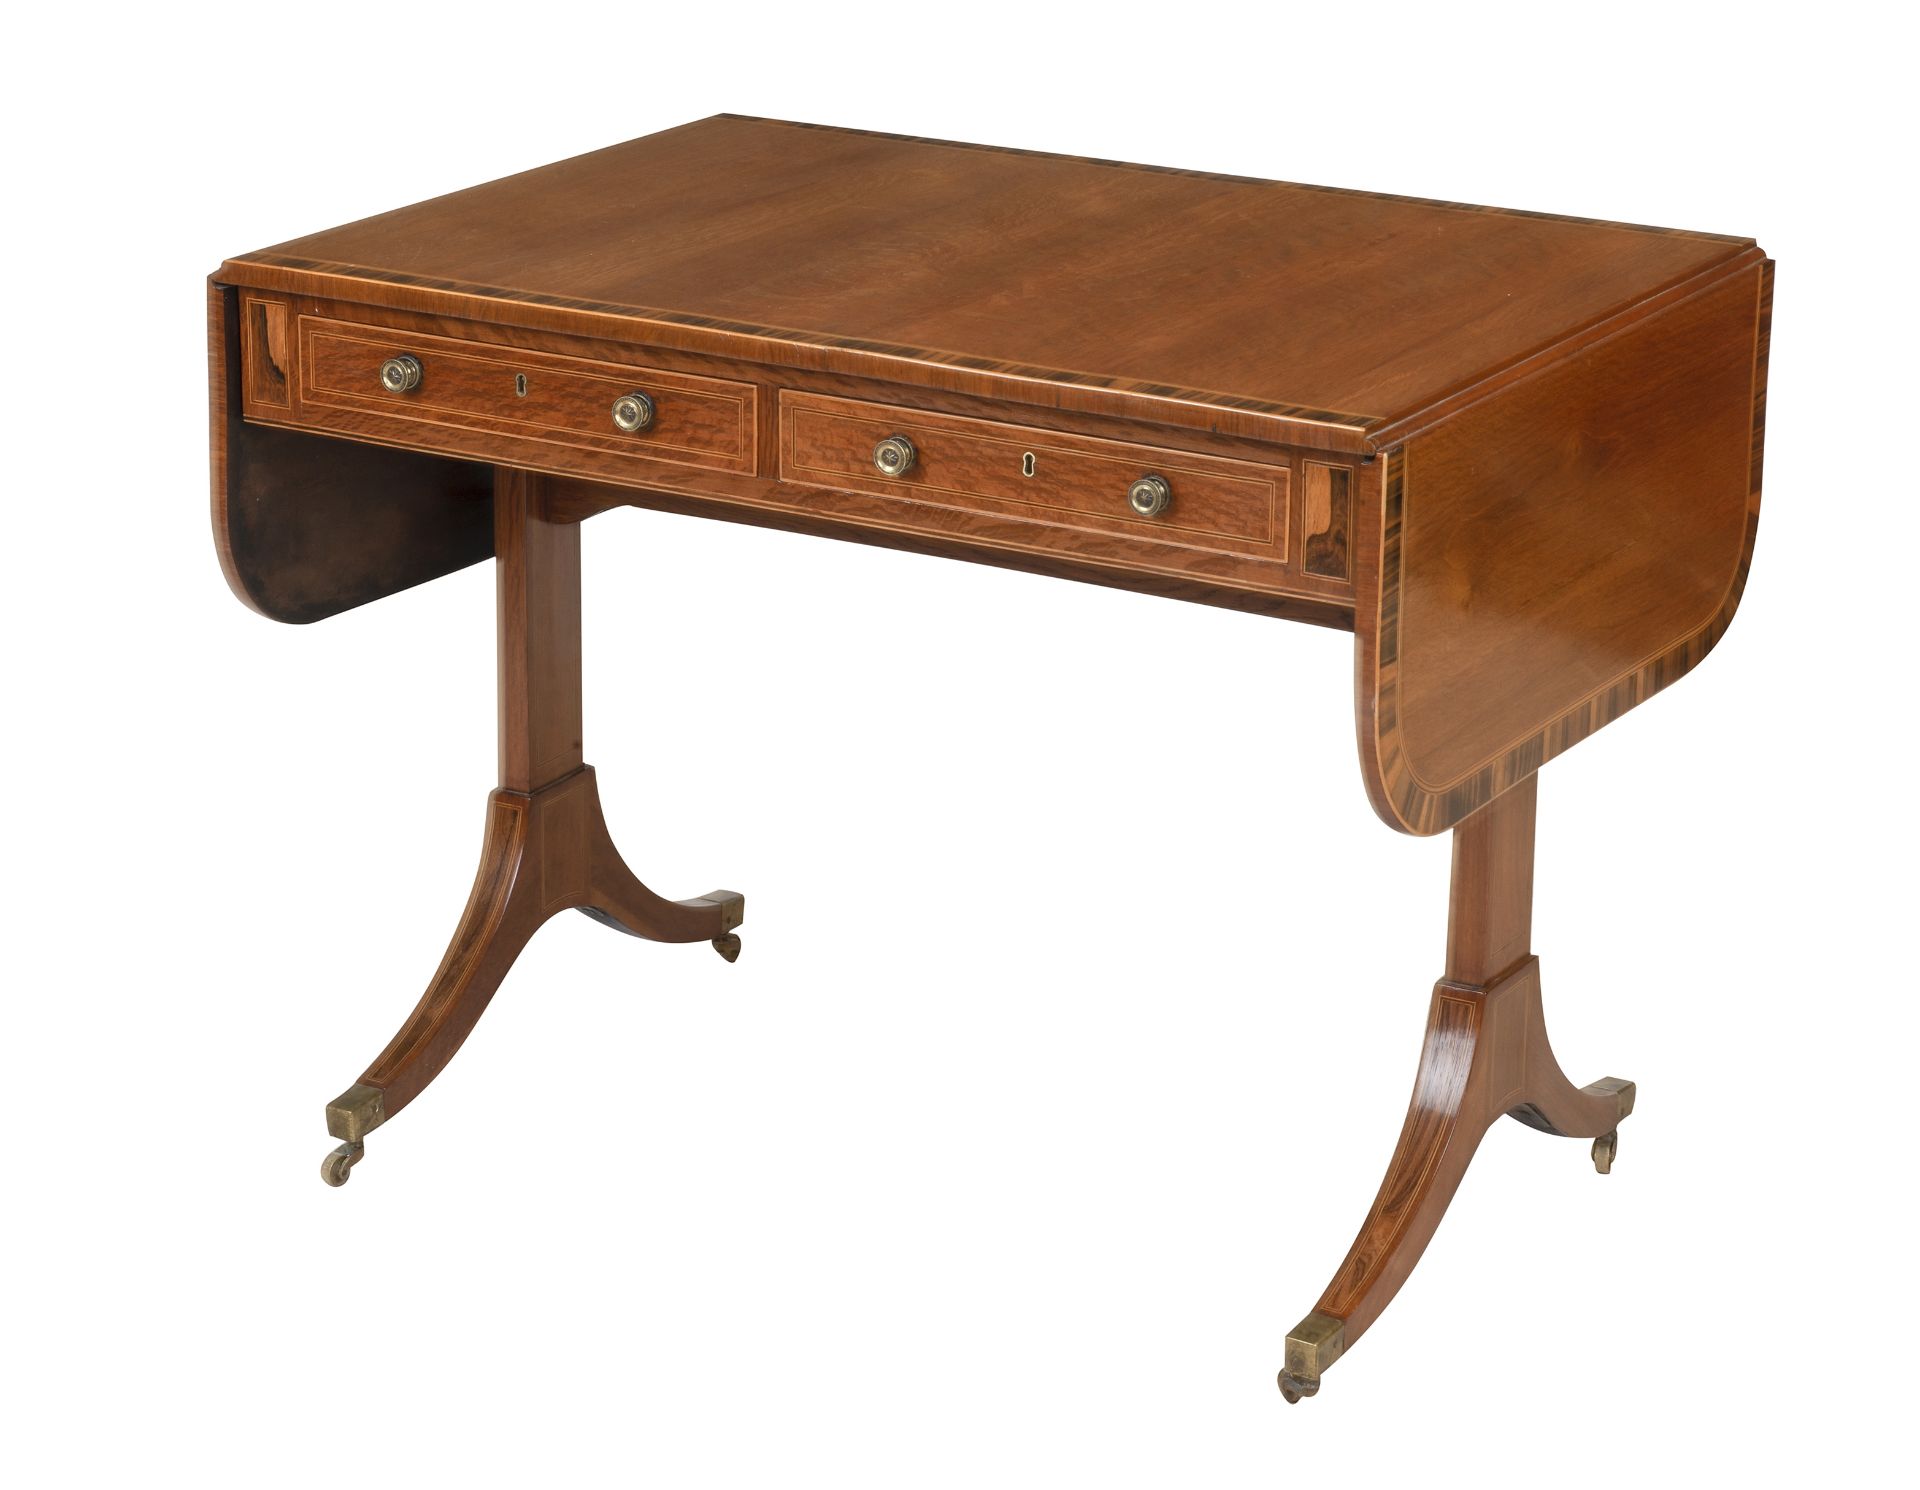 A 19th century Fruitwood and coromandel and line inlaid sofa table